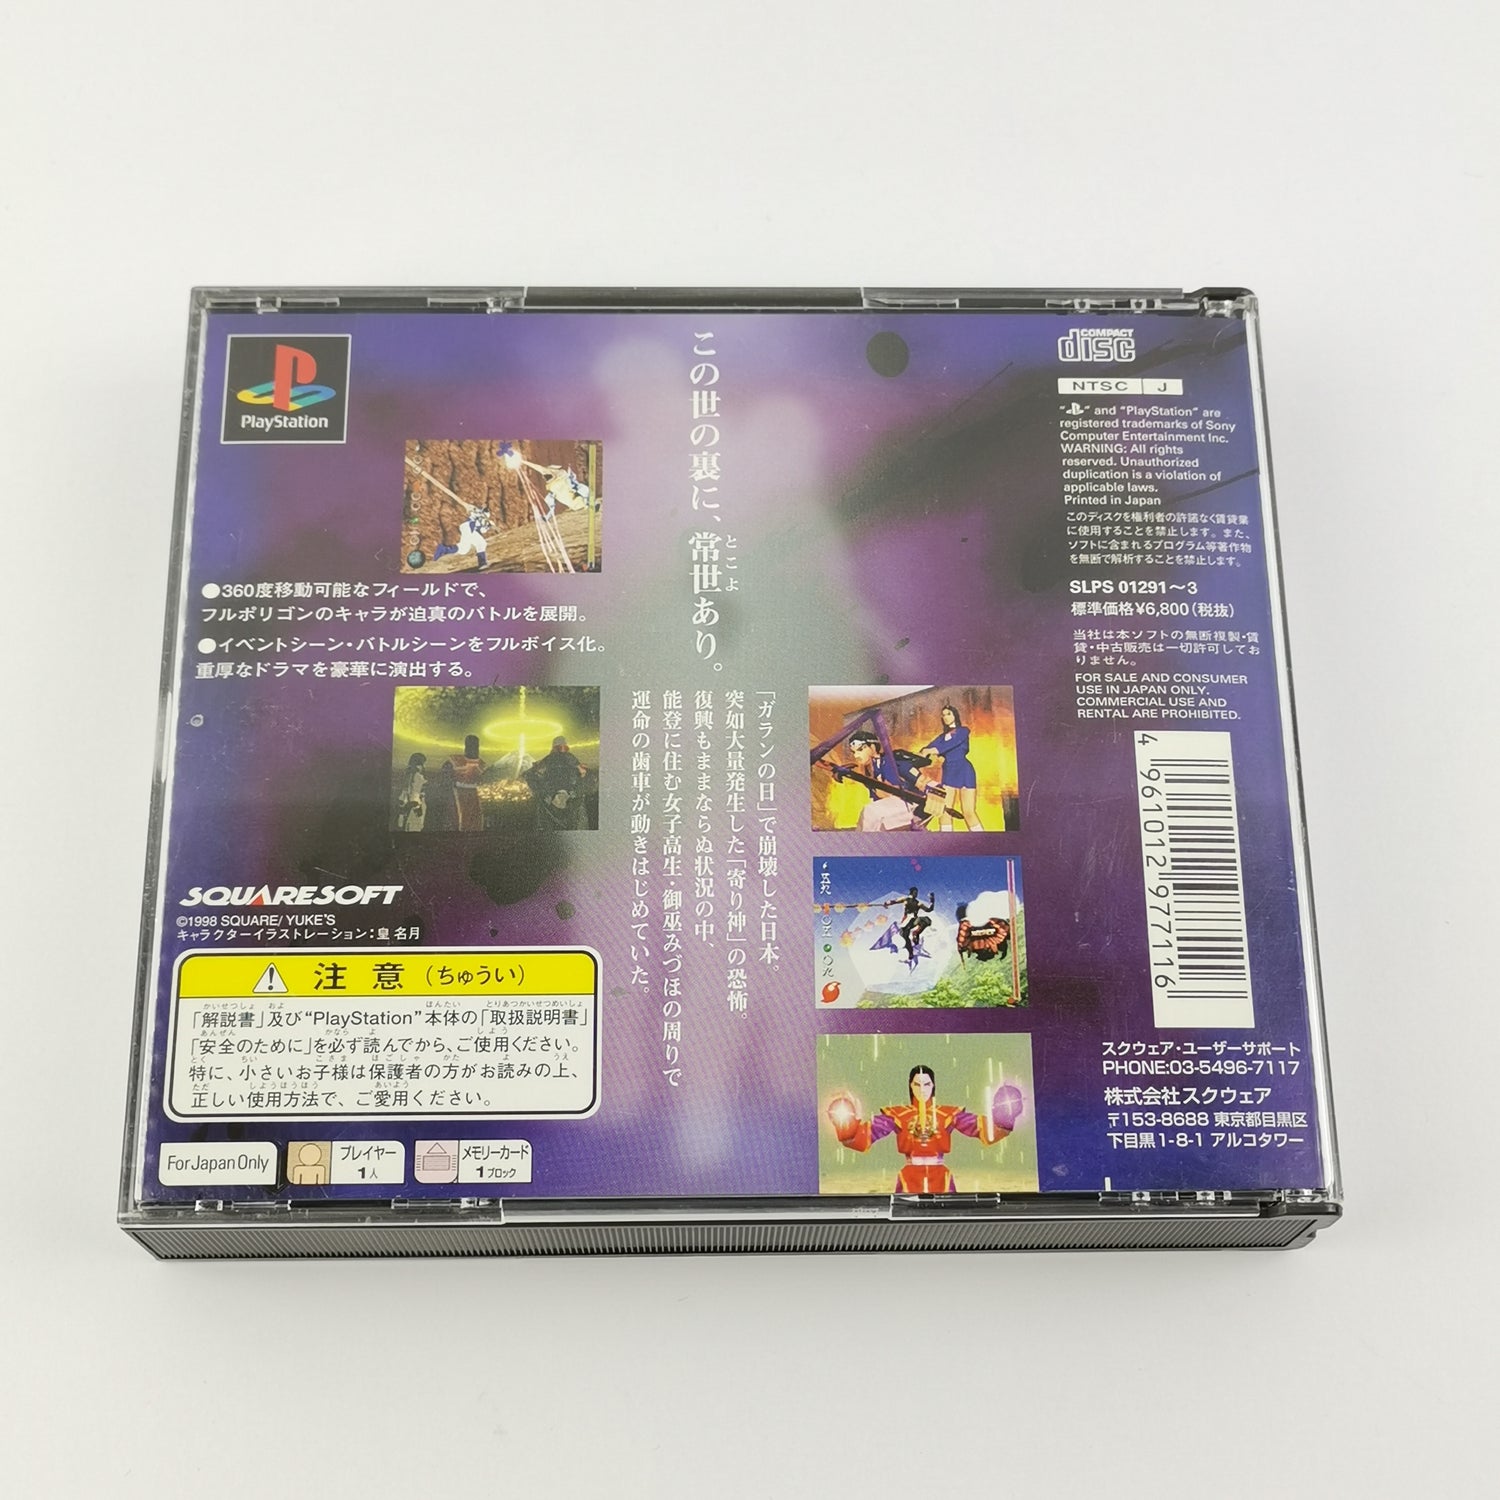 Sony Playstation 1 Game: Soukaigi + Official Guide Book - OVP JAPAN PS1 PSX